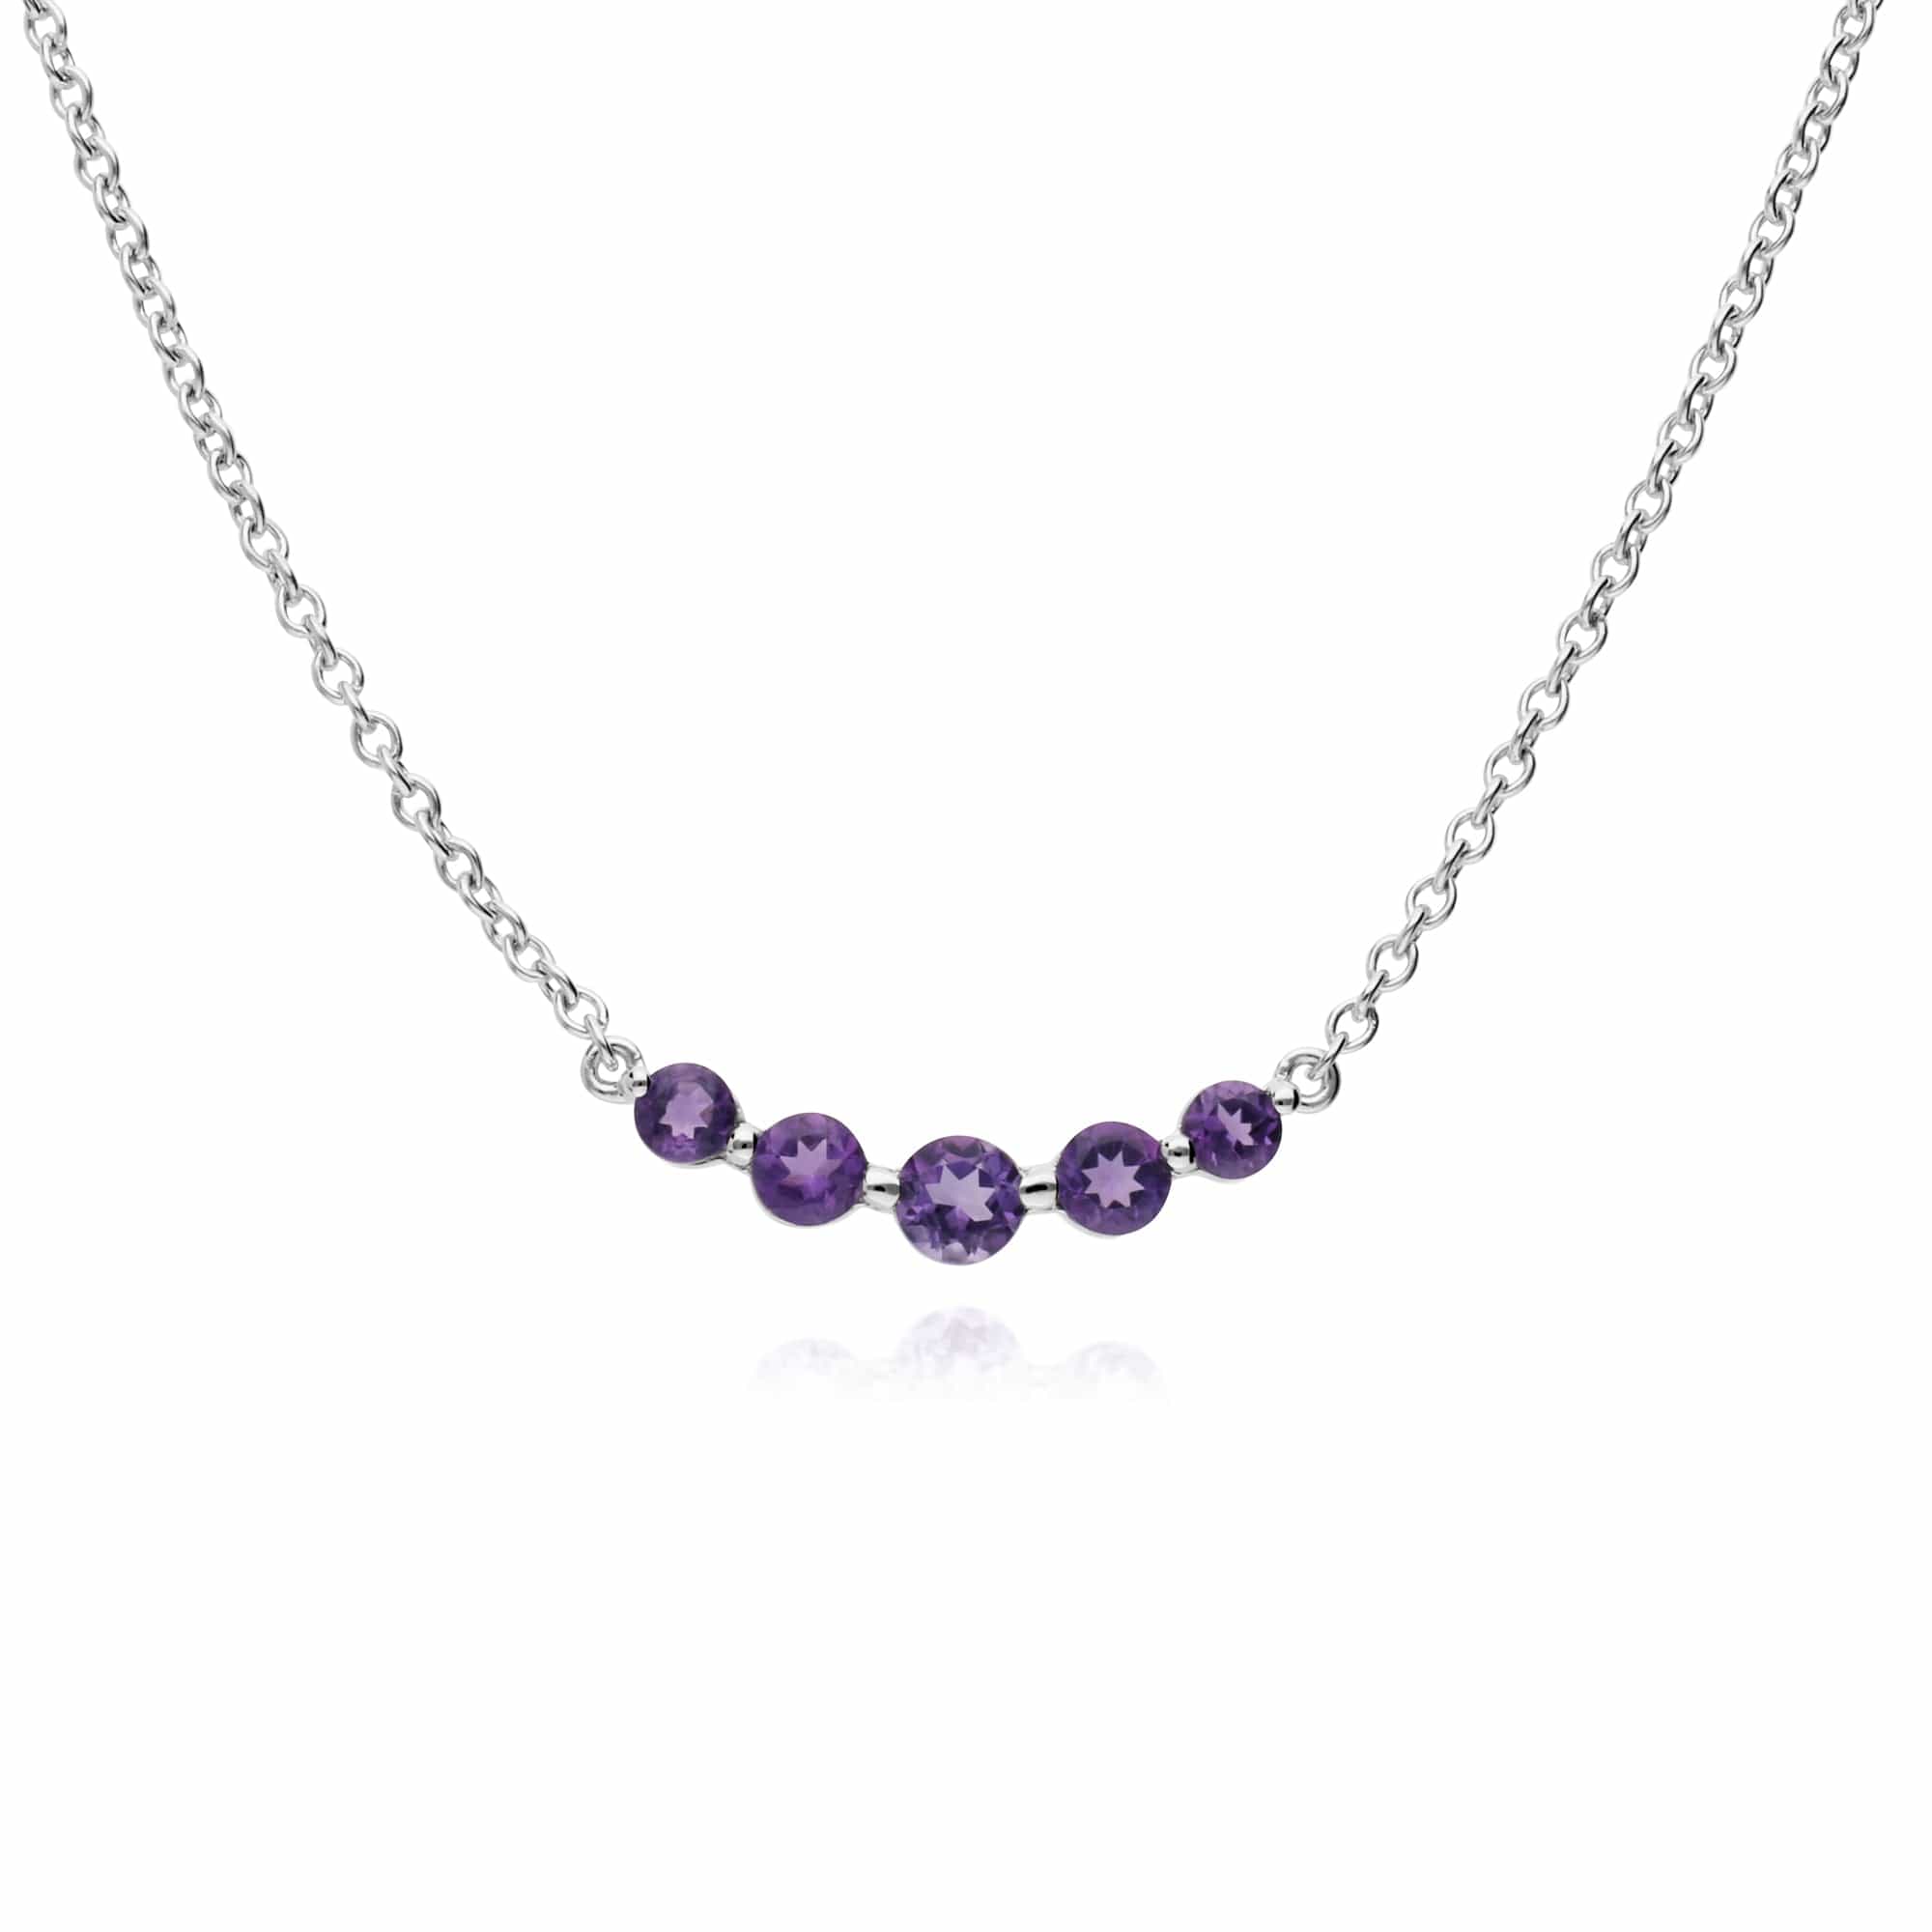 270N034103925-270L011003925 Classic Round Amethyst Five Stone Gradient Bracelet & Necklace Set in 925 Sterling Silver 2